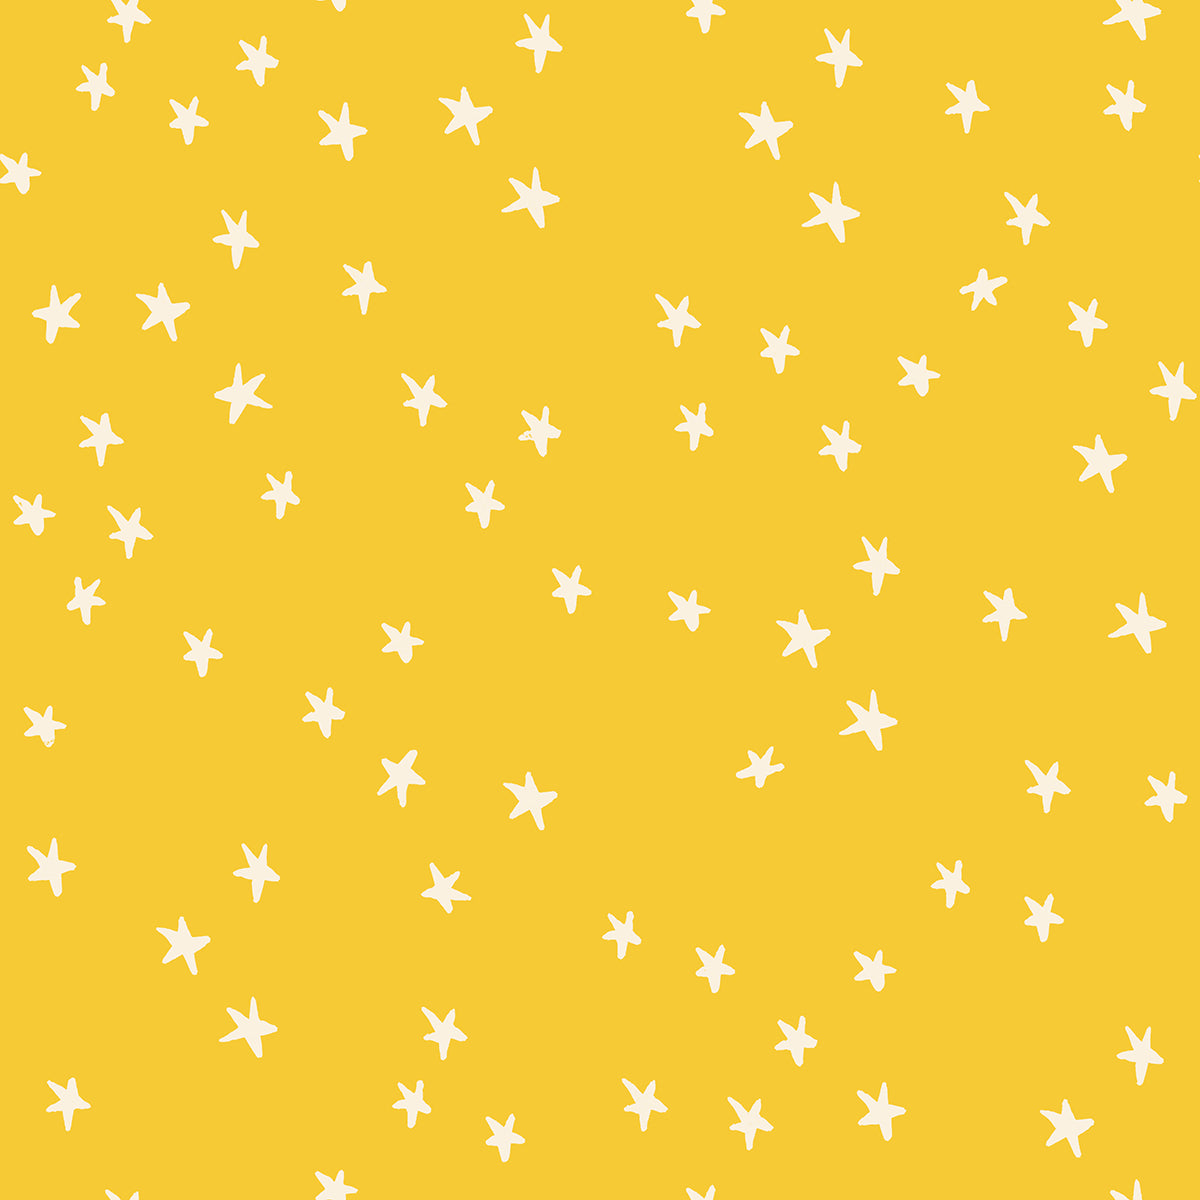 Starry in Sunshine by Alexia Abegg for Ruby Star Society